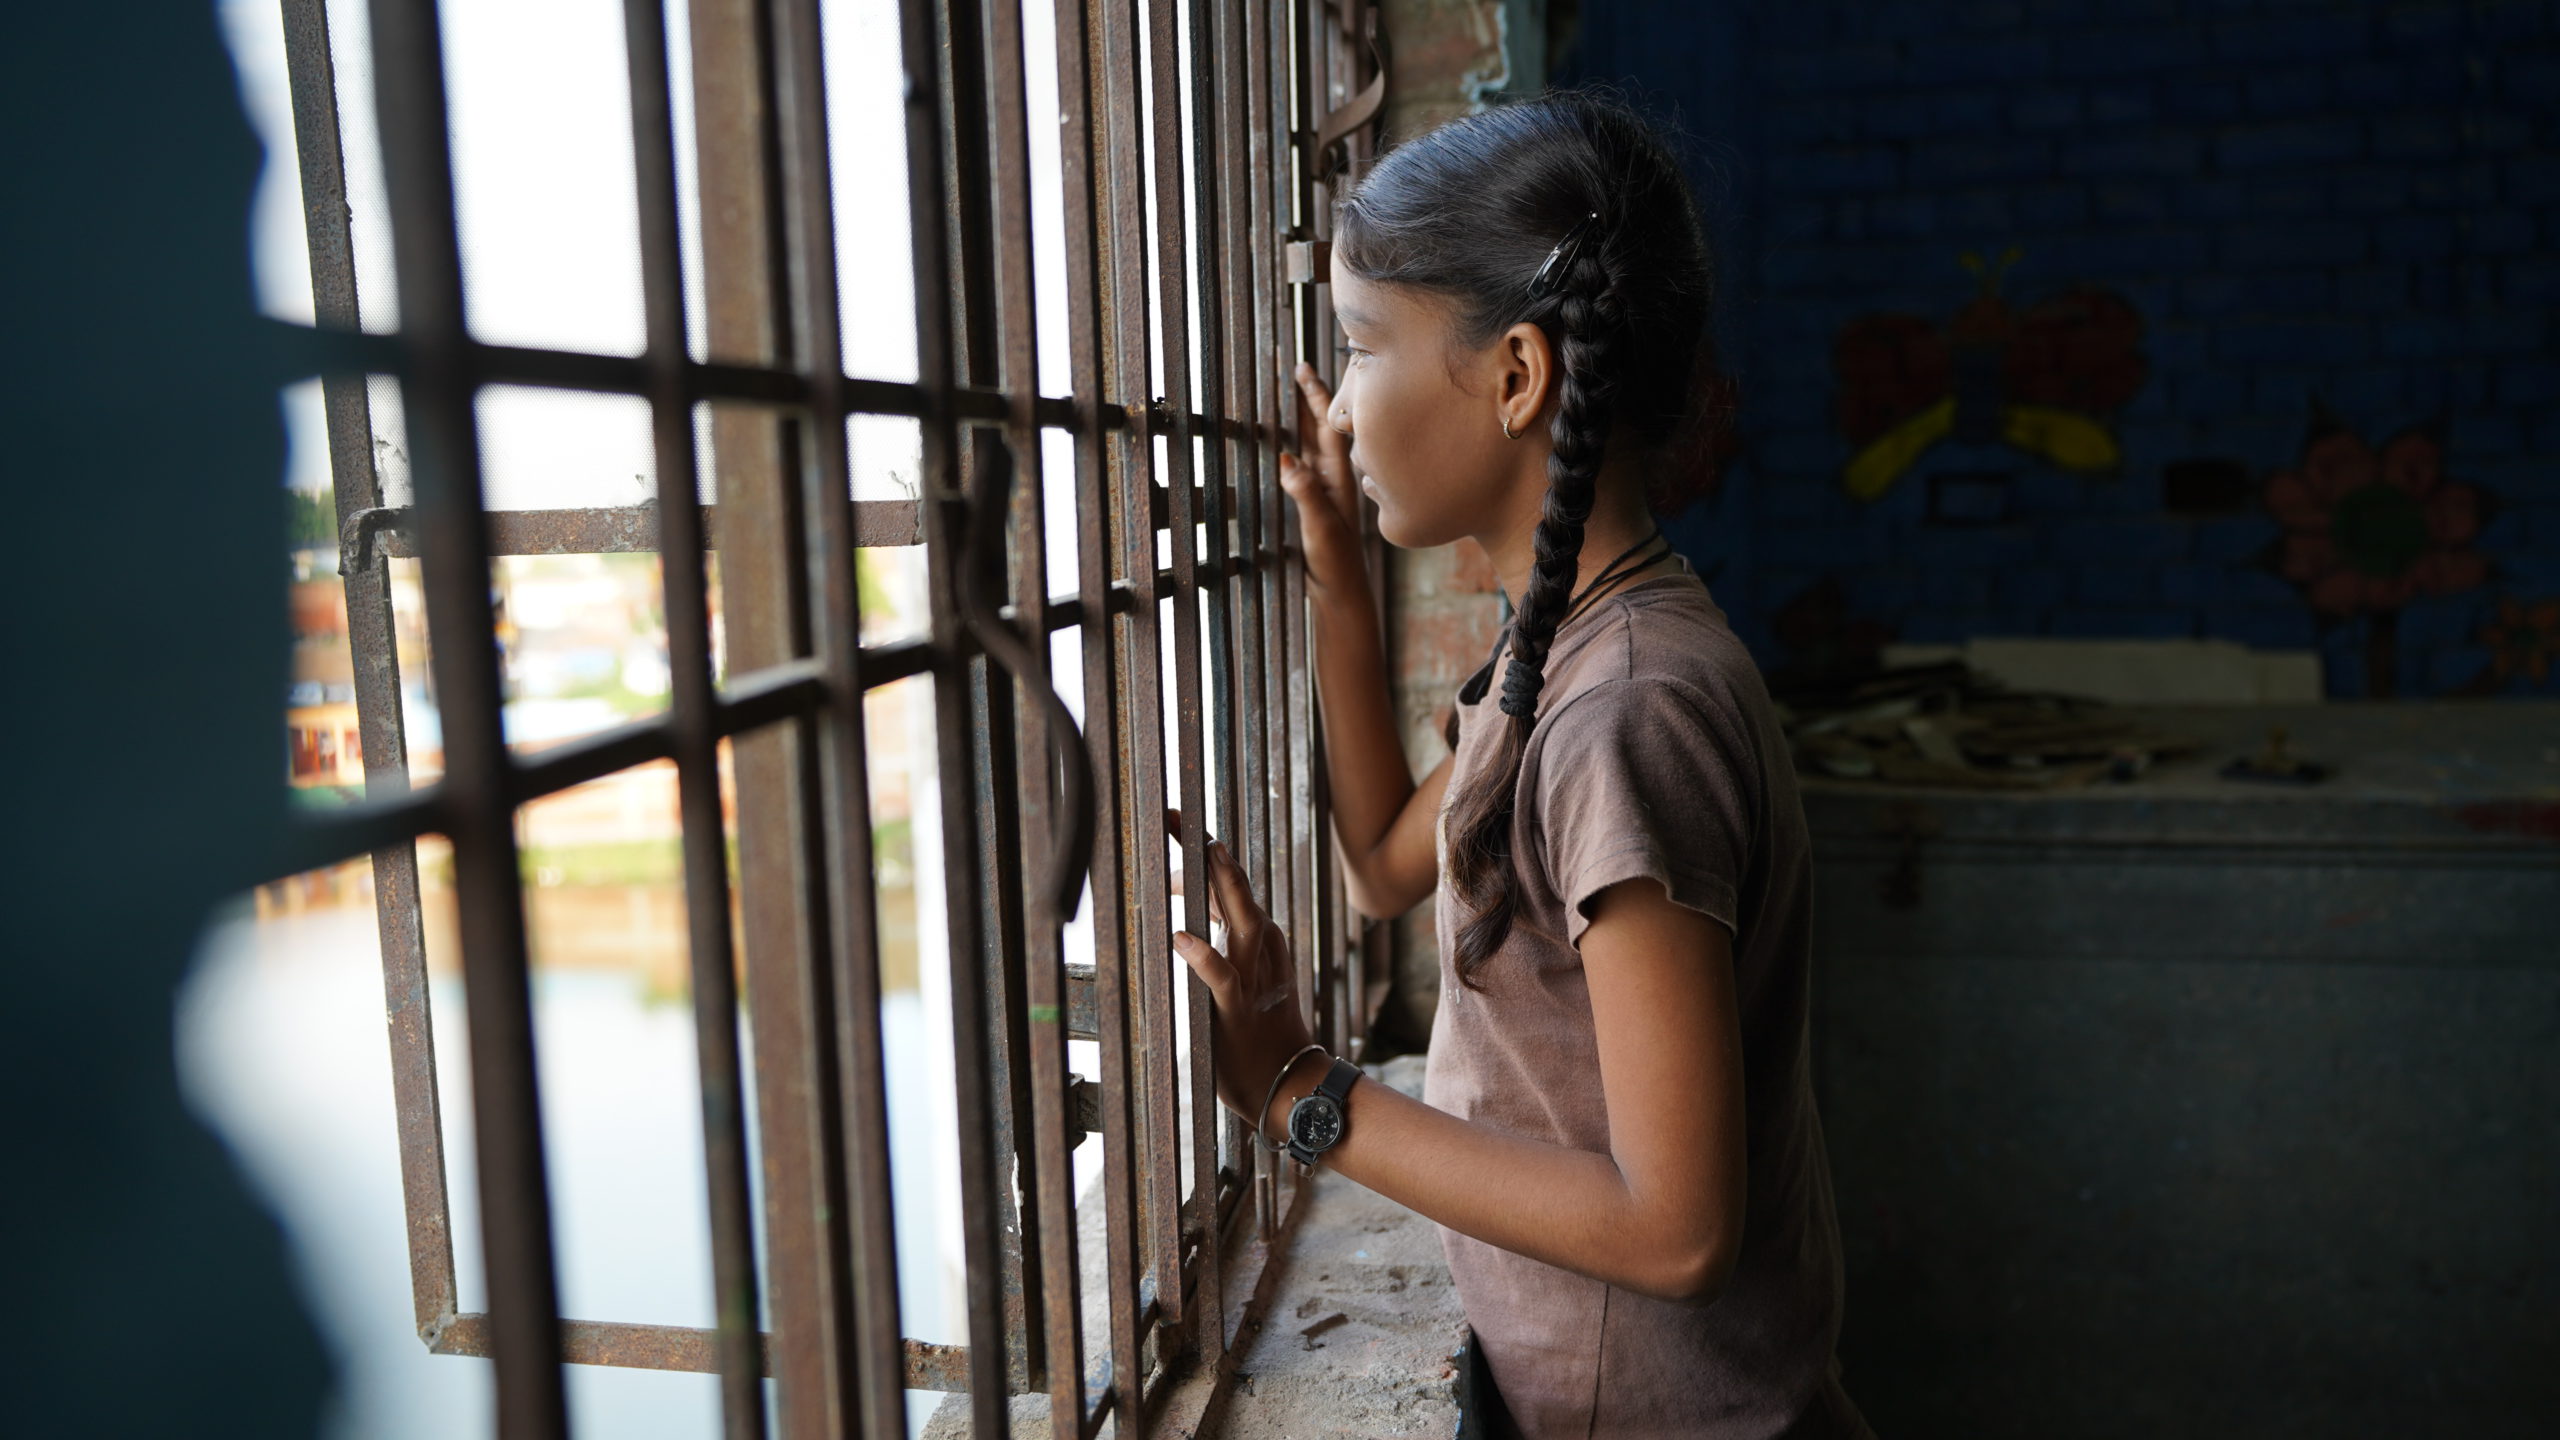 World Day Against Trafficking: 5 NGOs to support